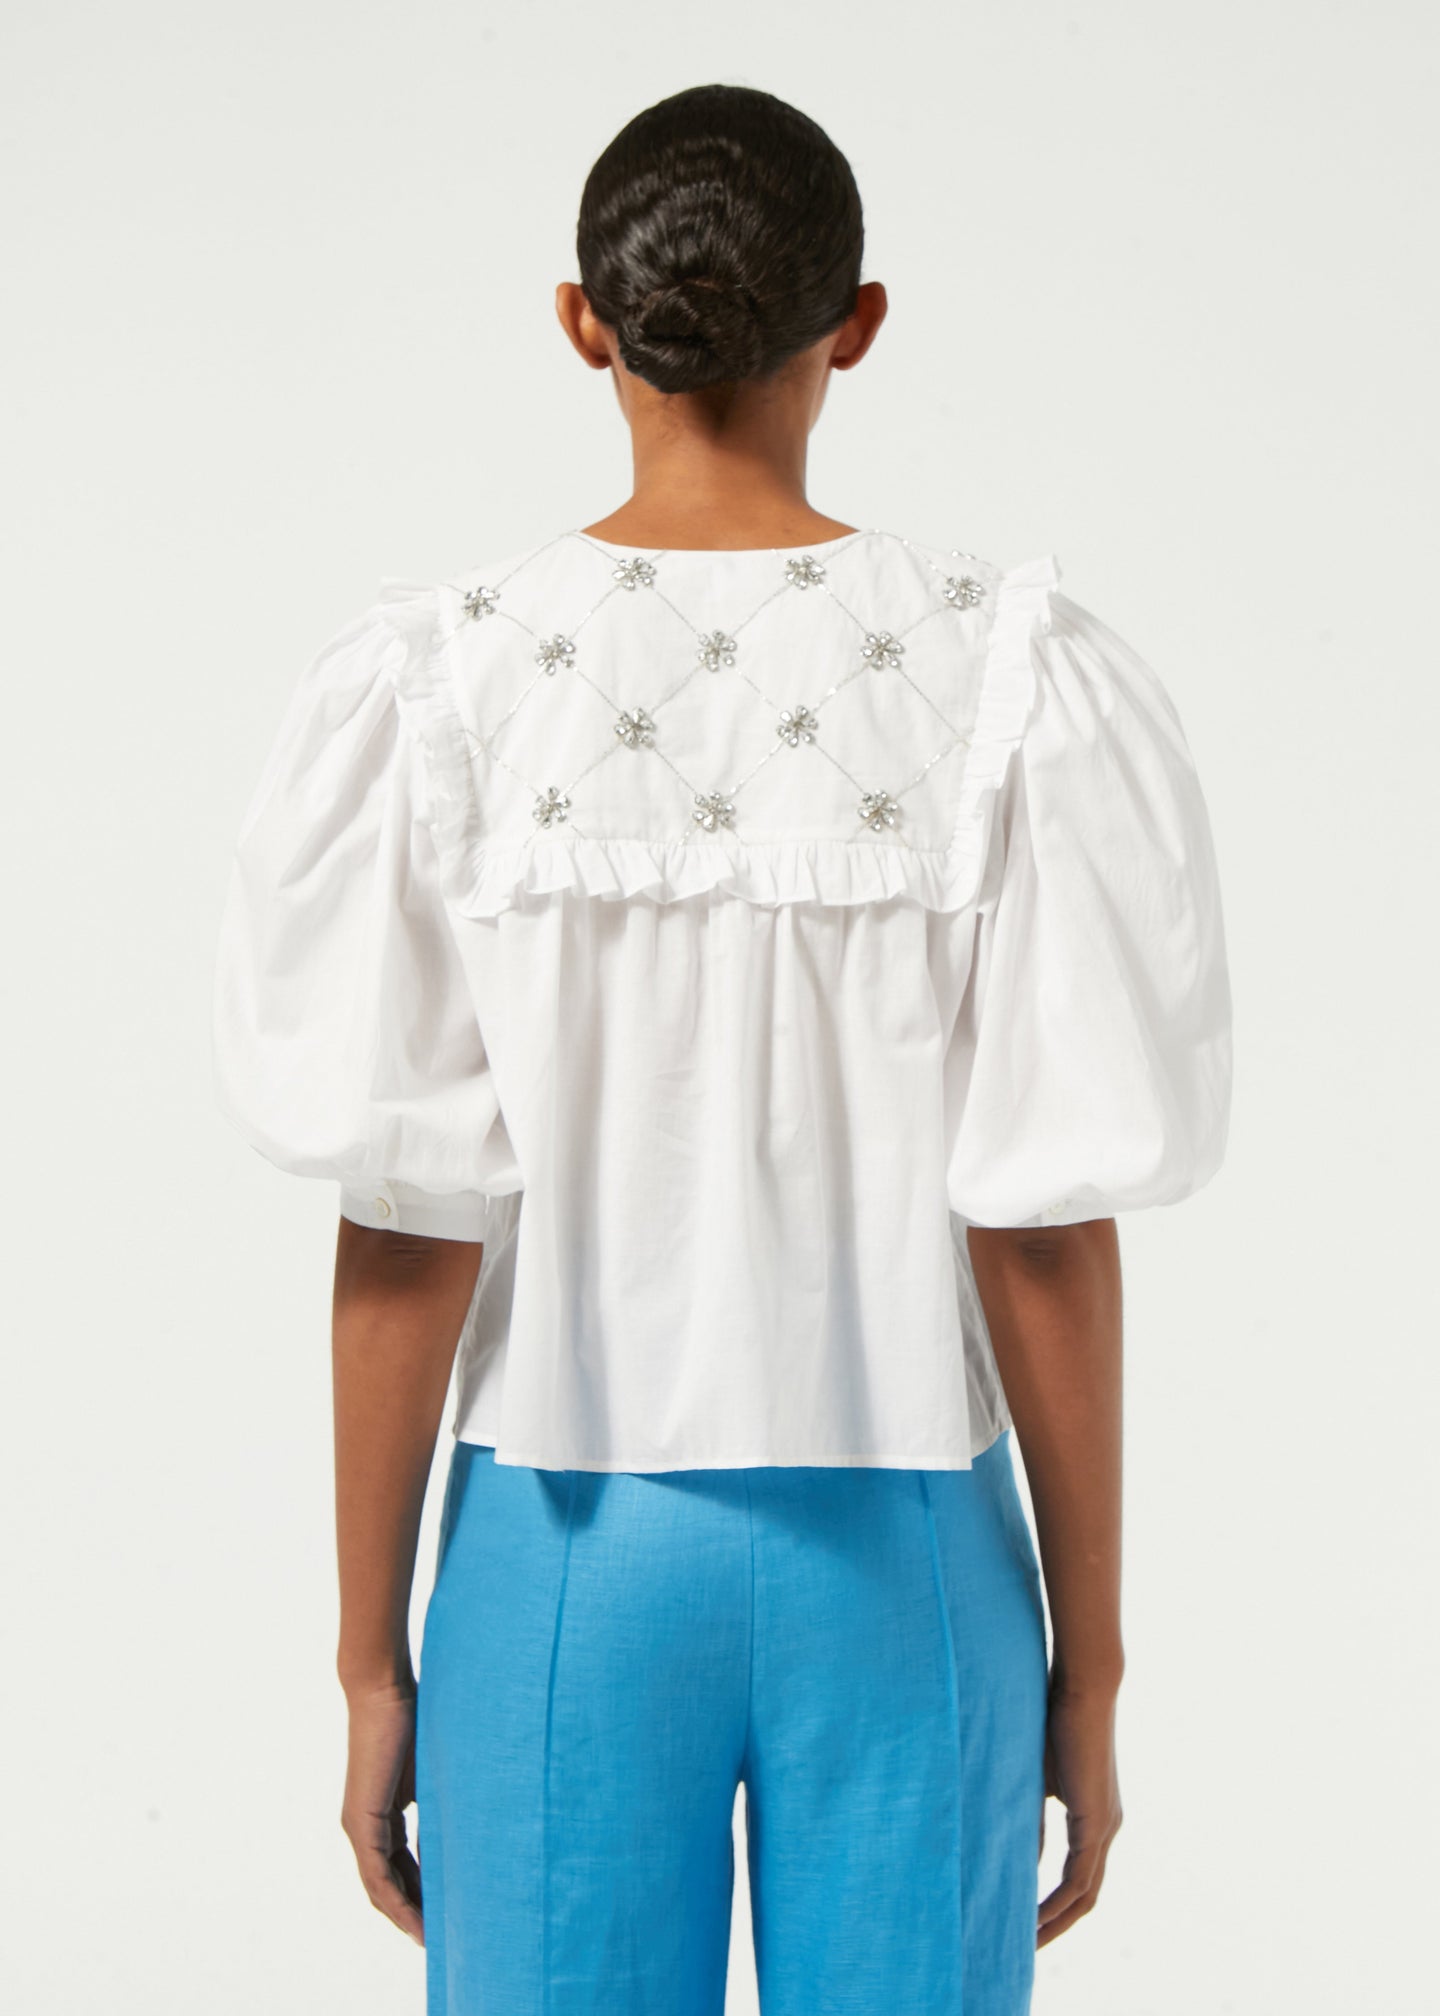 Blouse Tp00315cce Tilly Top White-Daisy-Crystal